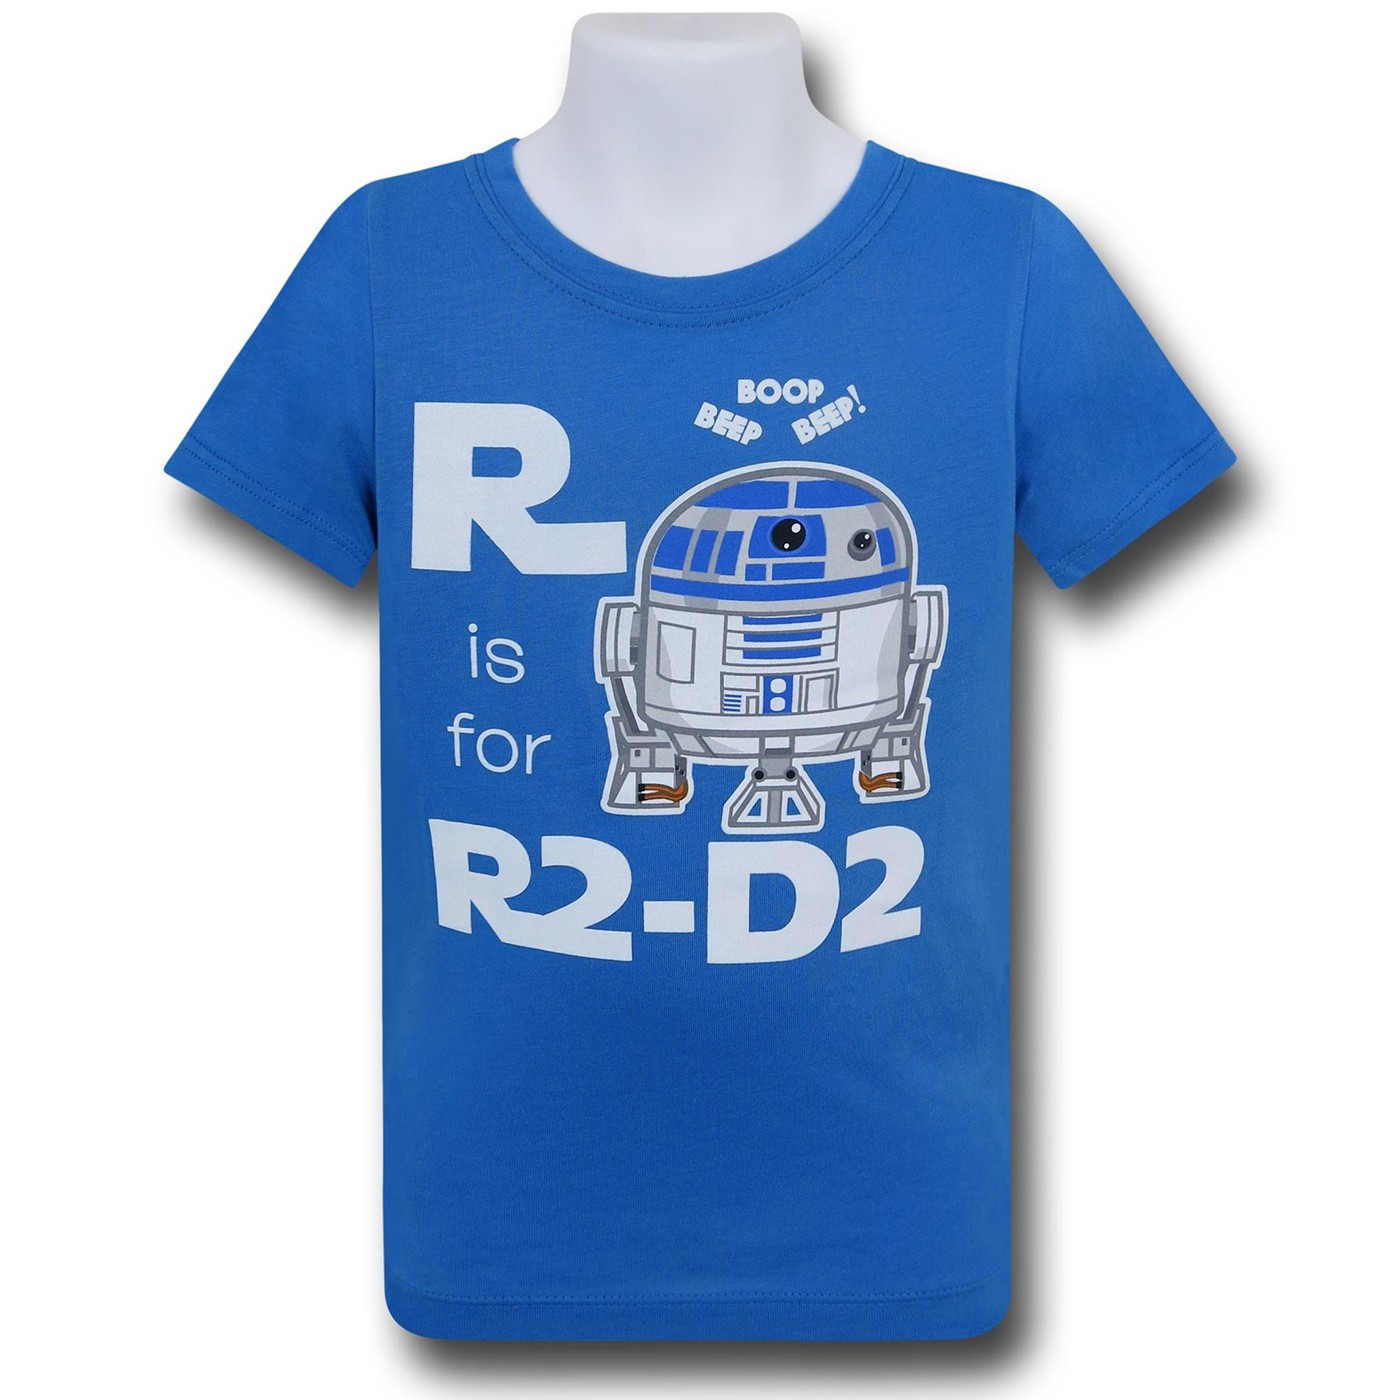 Star Wars R is for R2-D2 Toddler T-Shirt